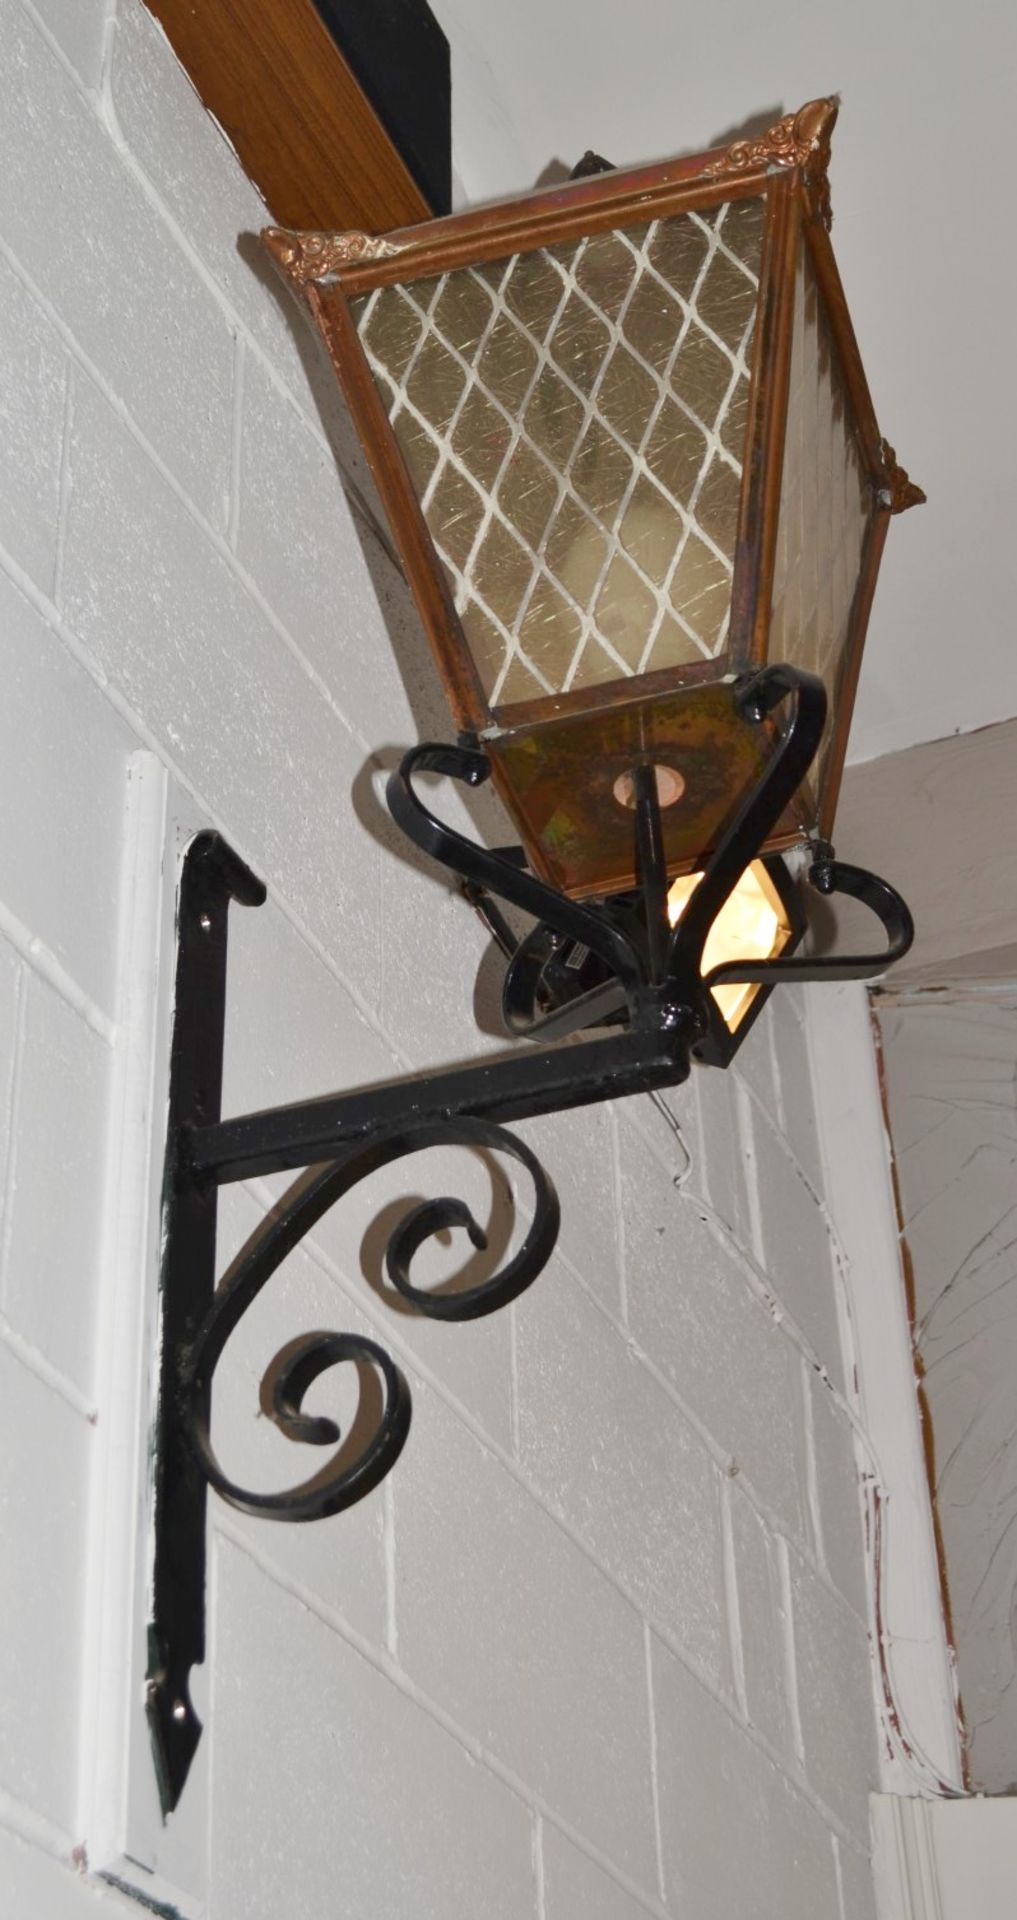 1 x Victorian Style Wall Lantern Light Fitting - Large Size in Black and Copper - Overal Height